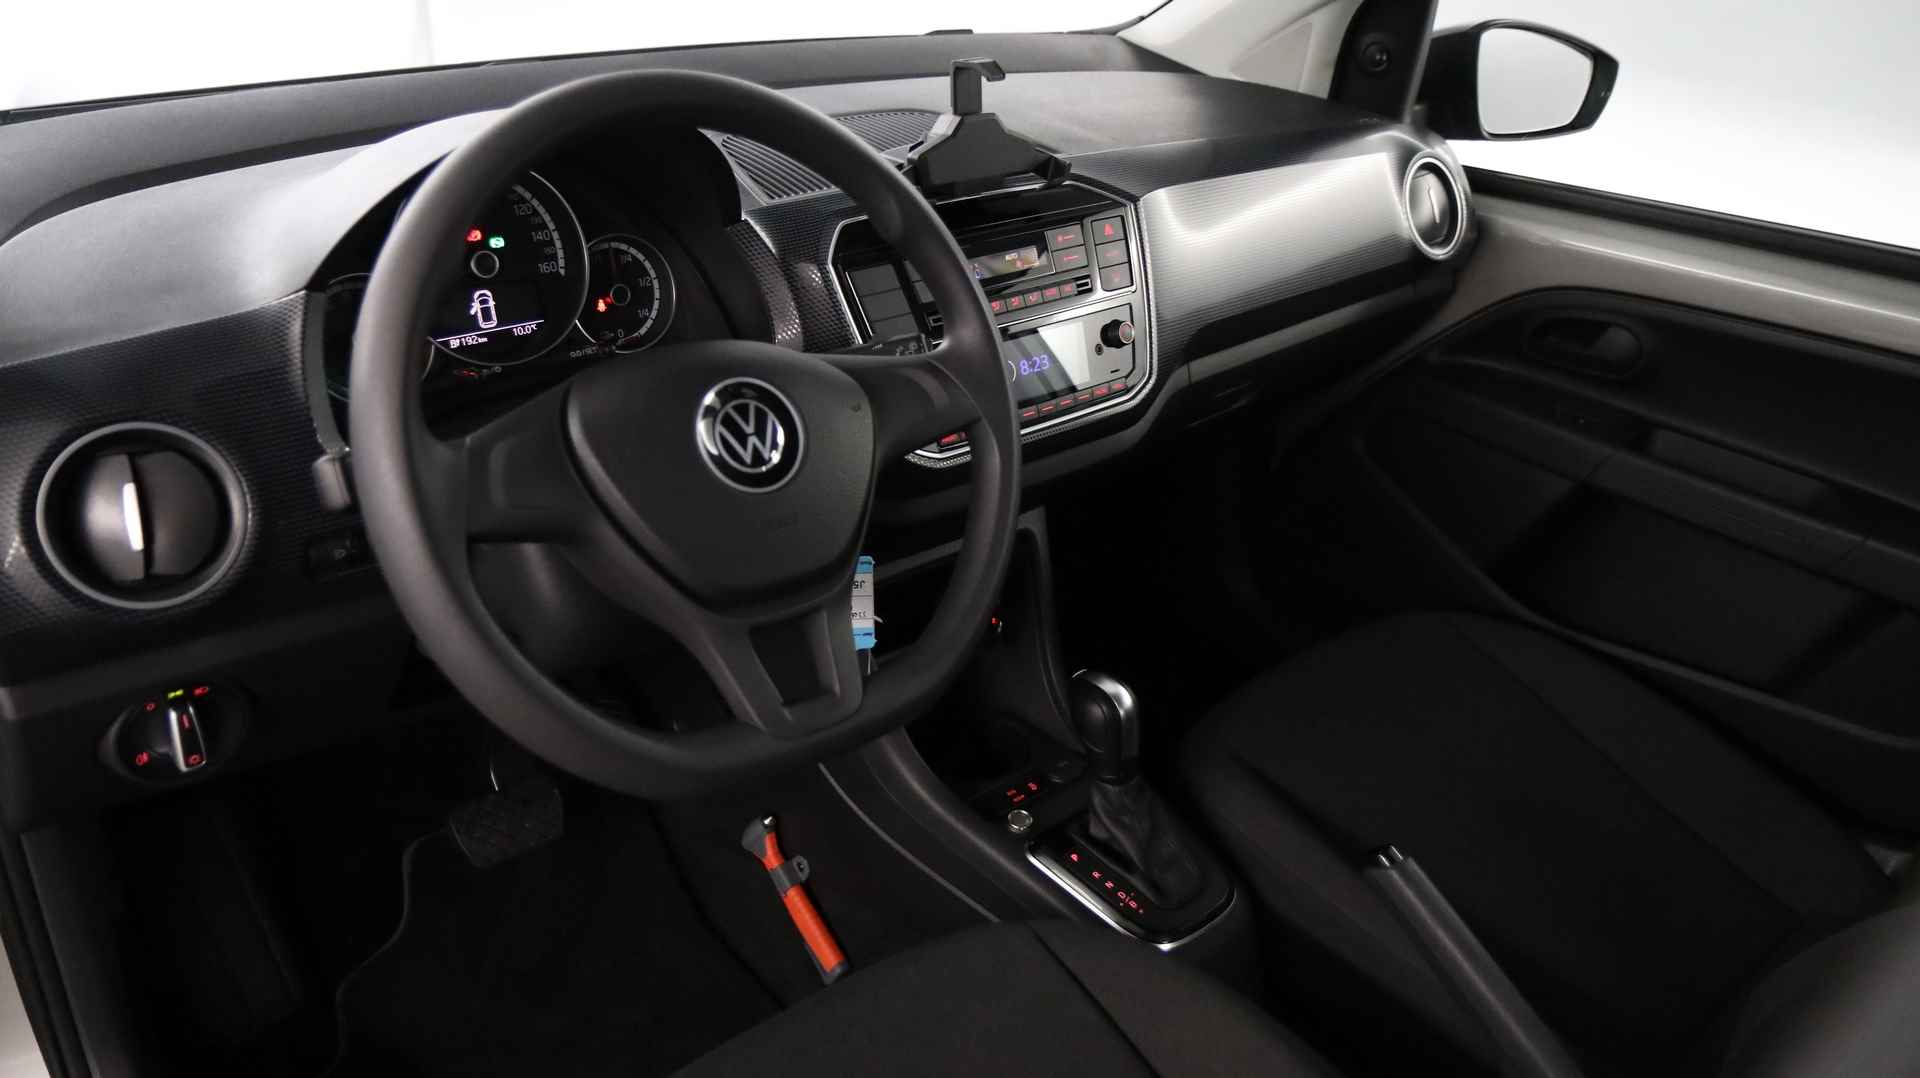 Volkswagen e-Up! e-up! / Airco / Climate control / Wordt verwacht - 15/28